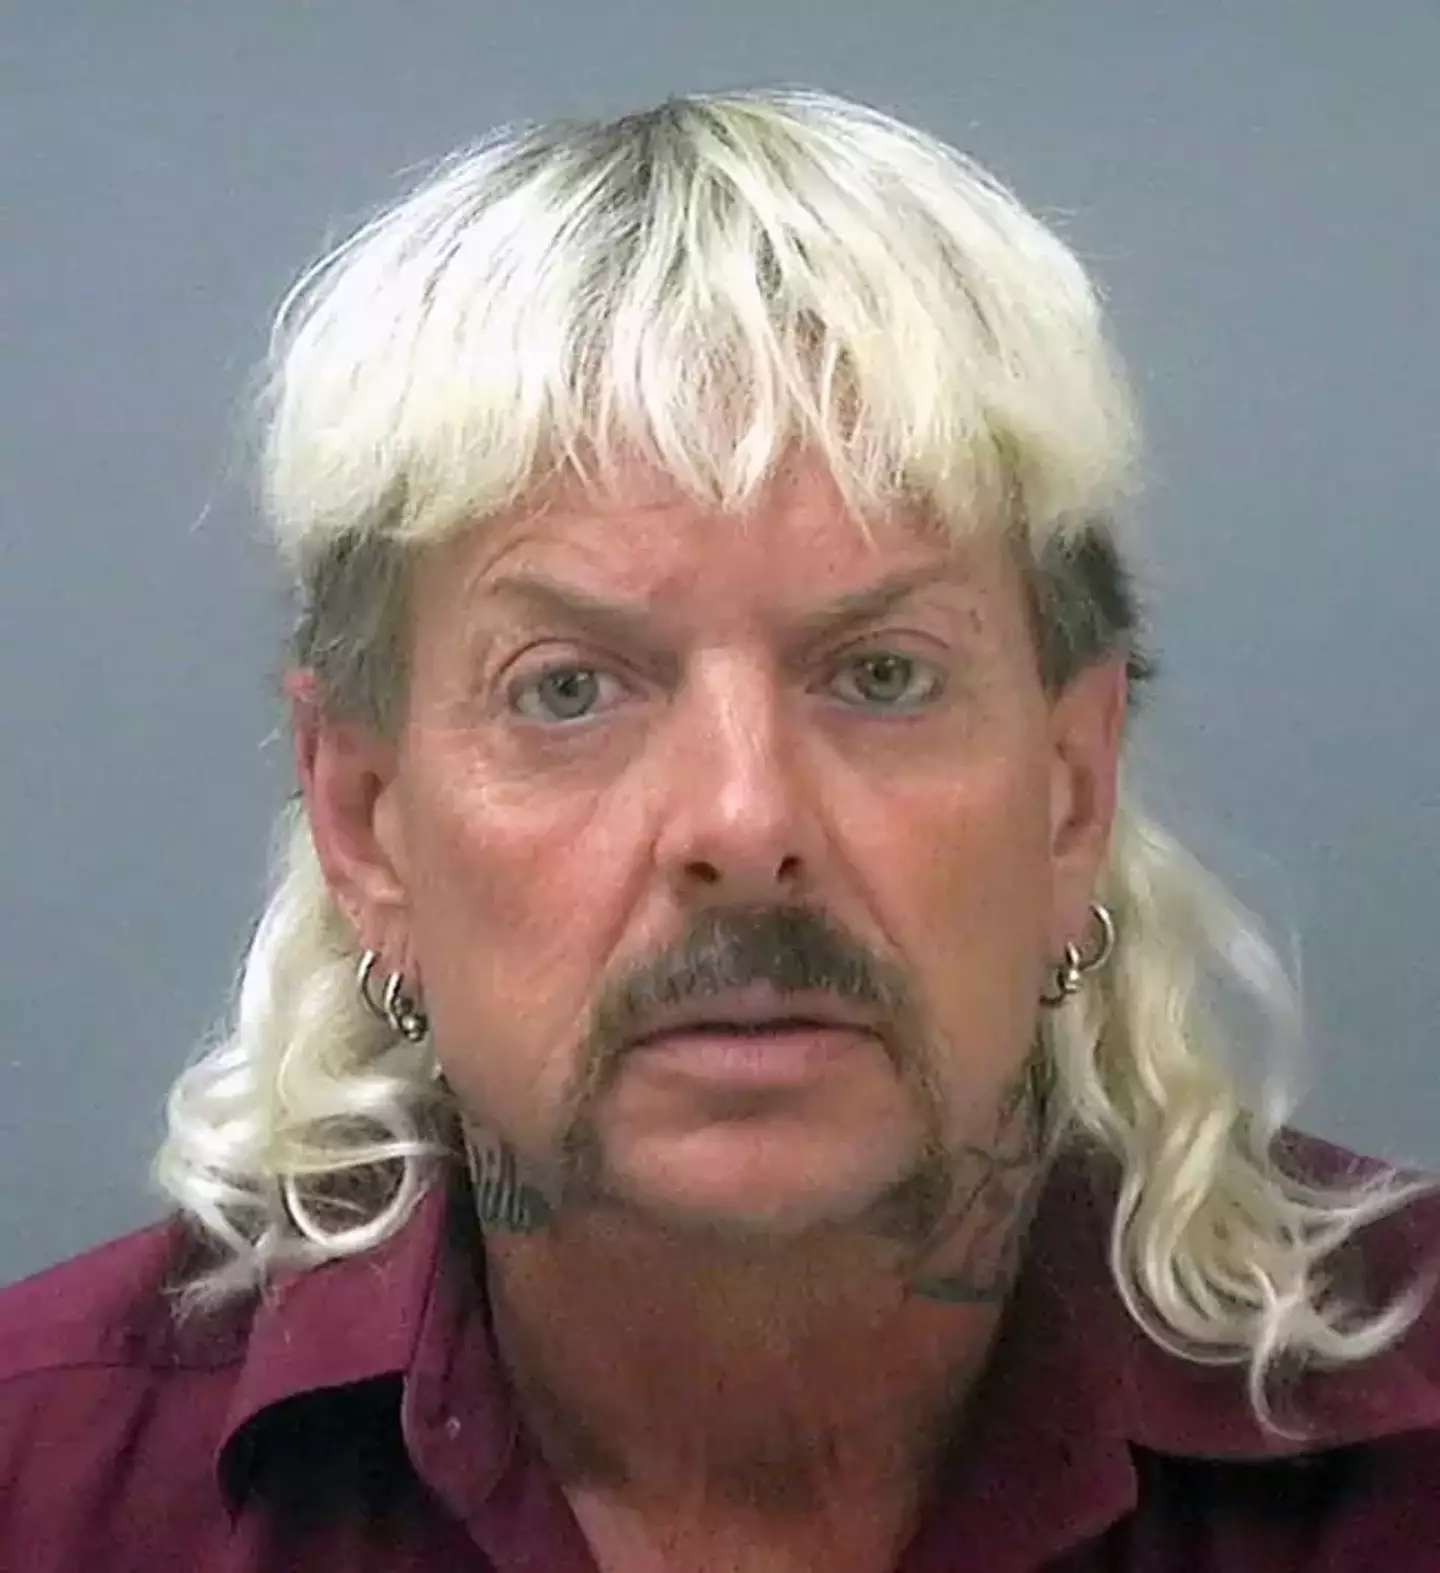 Joe Exotic is currently in prison for animal abuse and attempted murder.